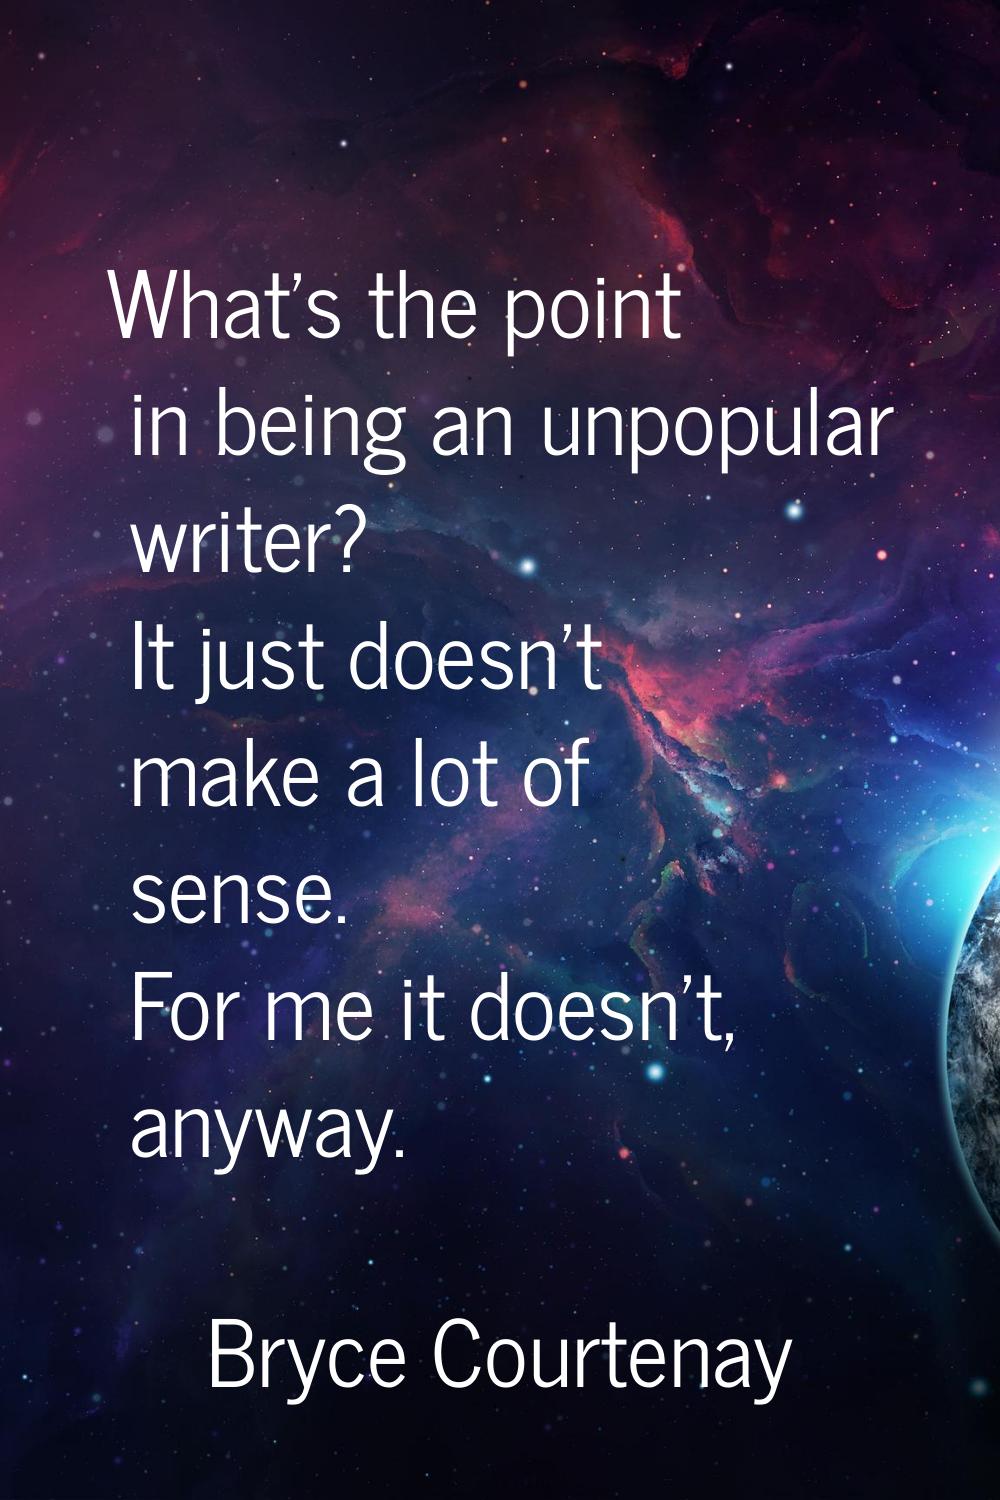 What's the point in being an unpopular writer? It just doesn't make a lot of sense. For me it doesn